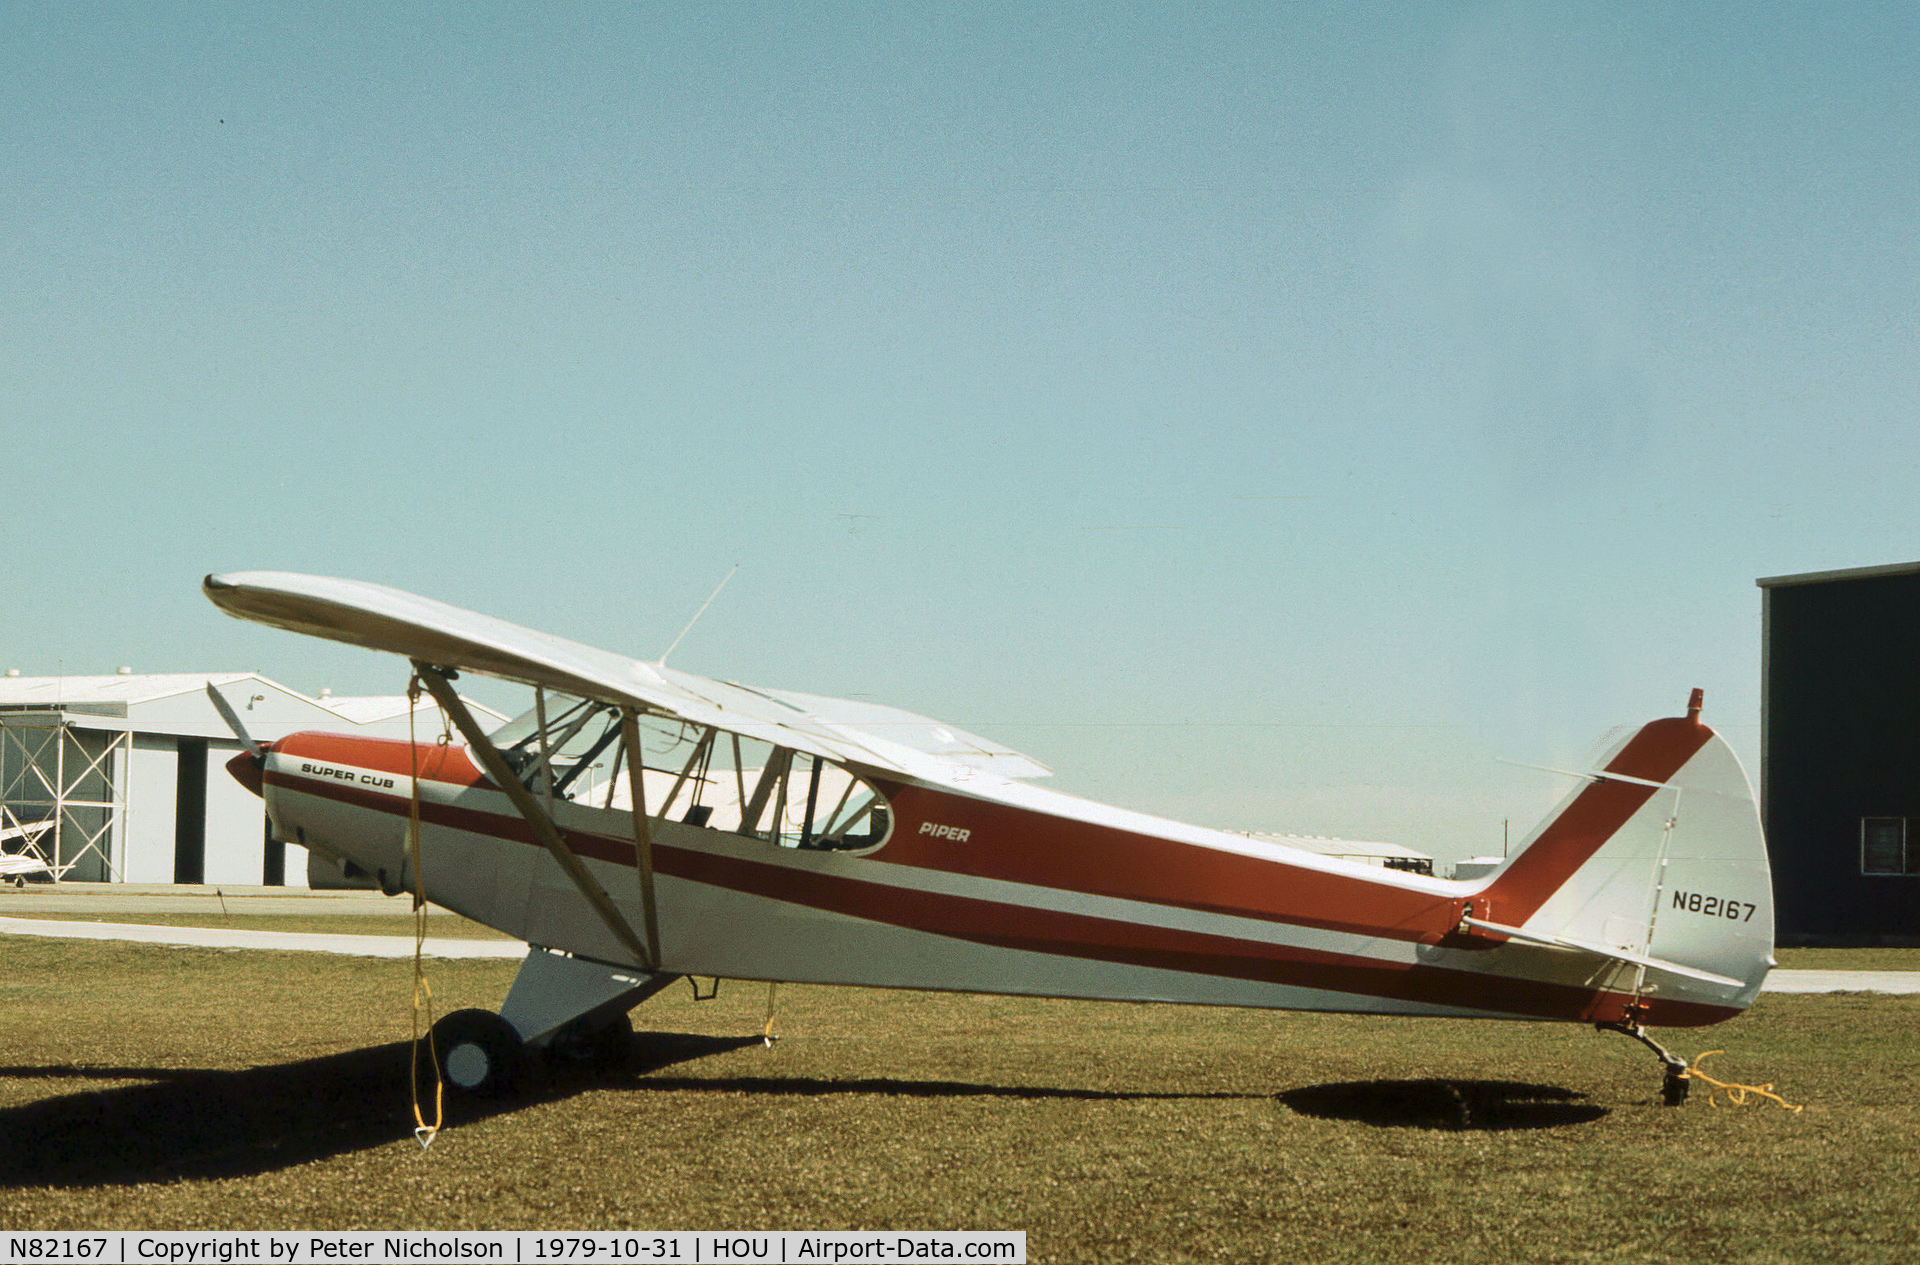 N82167, 1978 Piper PA-18-150 Super Cub C/N 18-7809138, PA-18-150 Super Cub as seen at Houston Hobby Airport in October 1979.